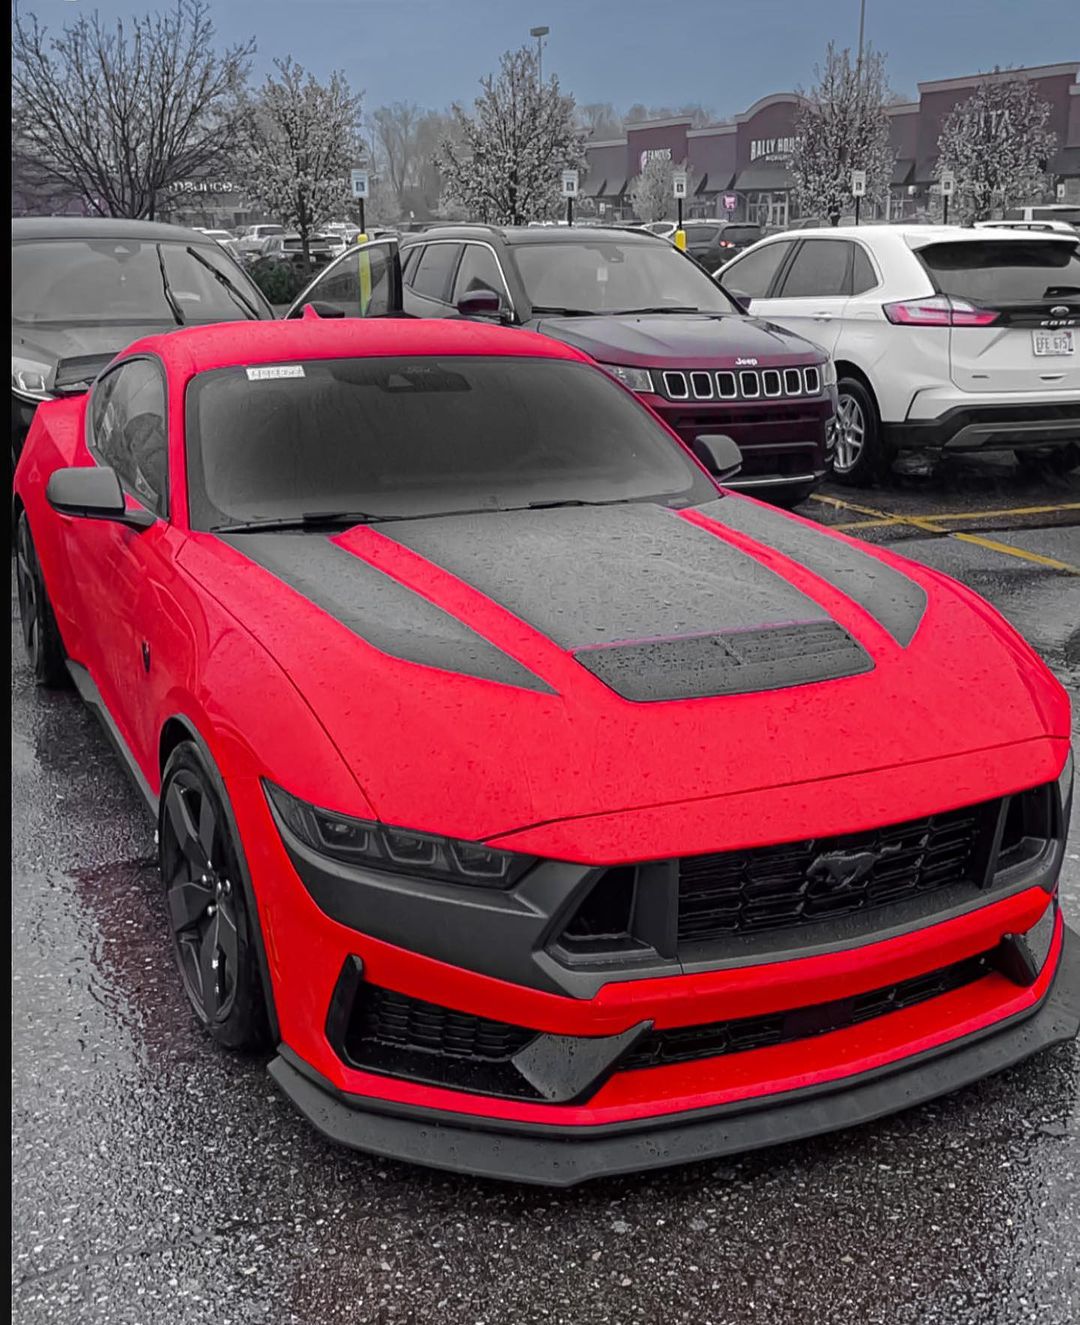 S650 Mustang Official RACE RED Mustang S650 Thread 343930122_574612321317714_7094523731144338502_n